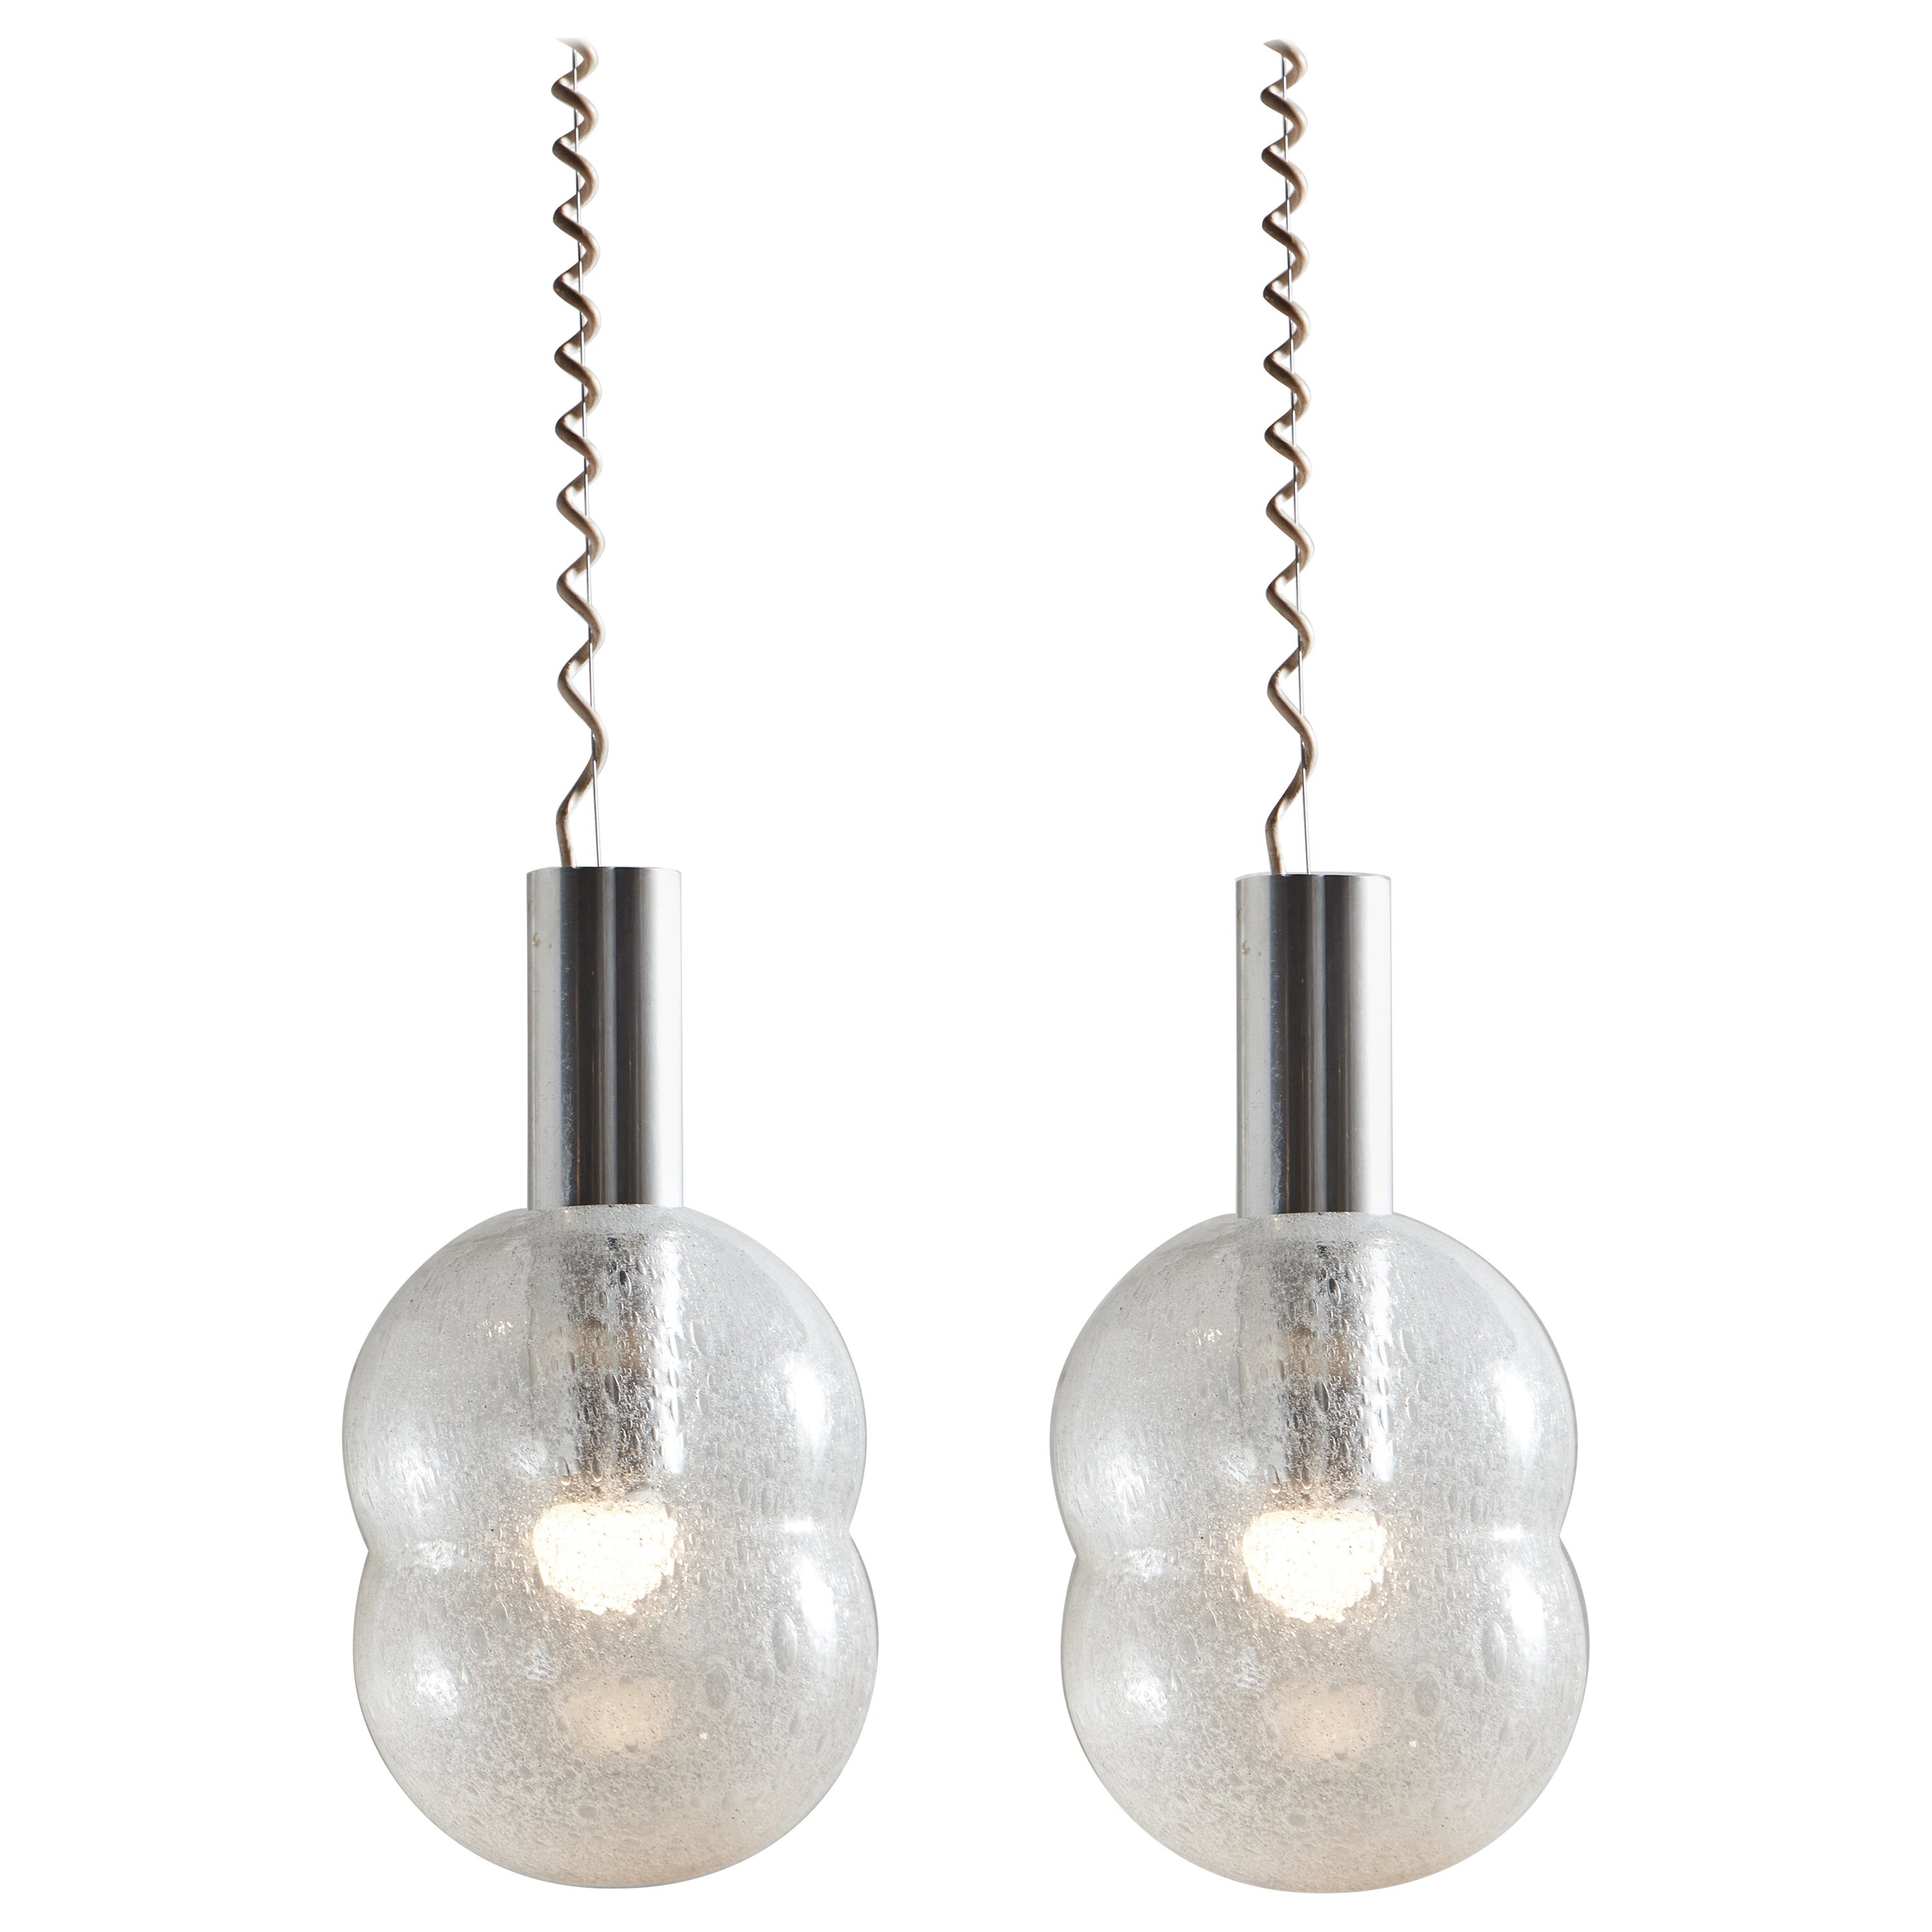 Pair of ‘Bilobo’ Pendant Lights by Tobia Scarpa for Flos, Italy 1960s